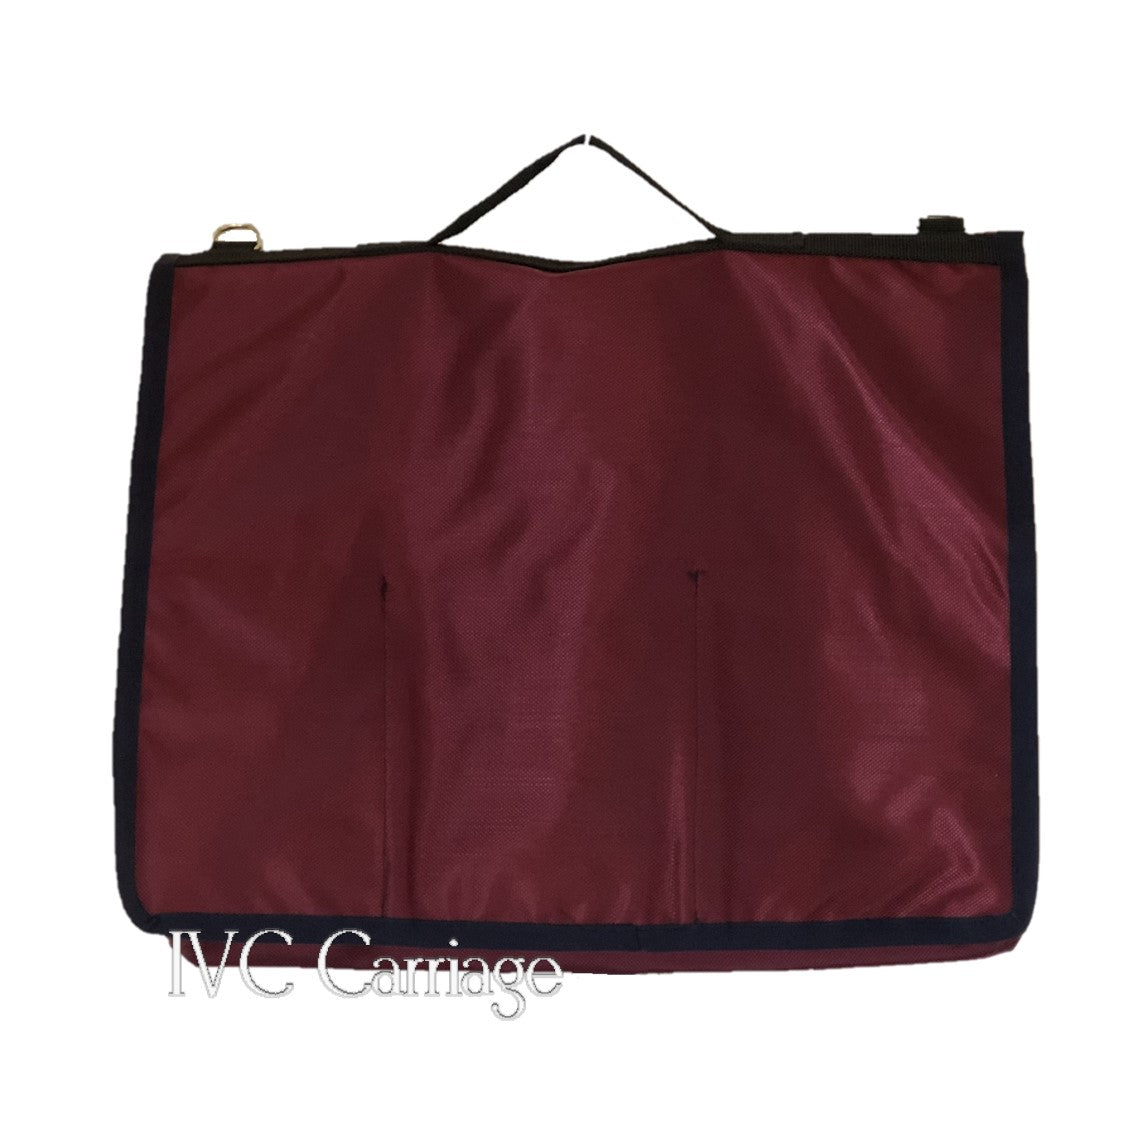 Horse Stall Bag | IVC Carriage